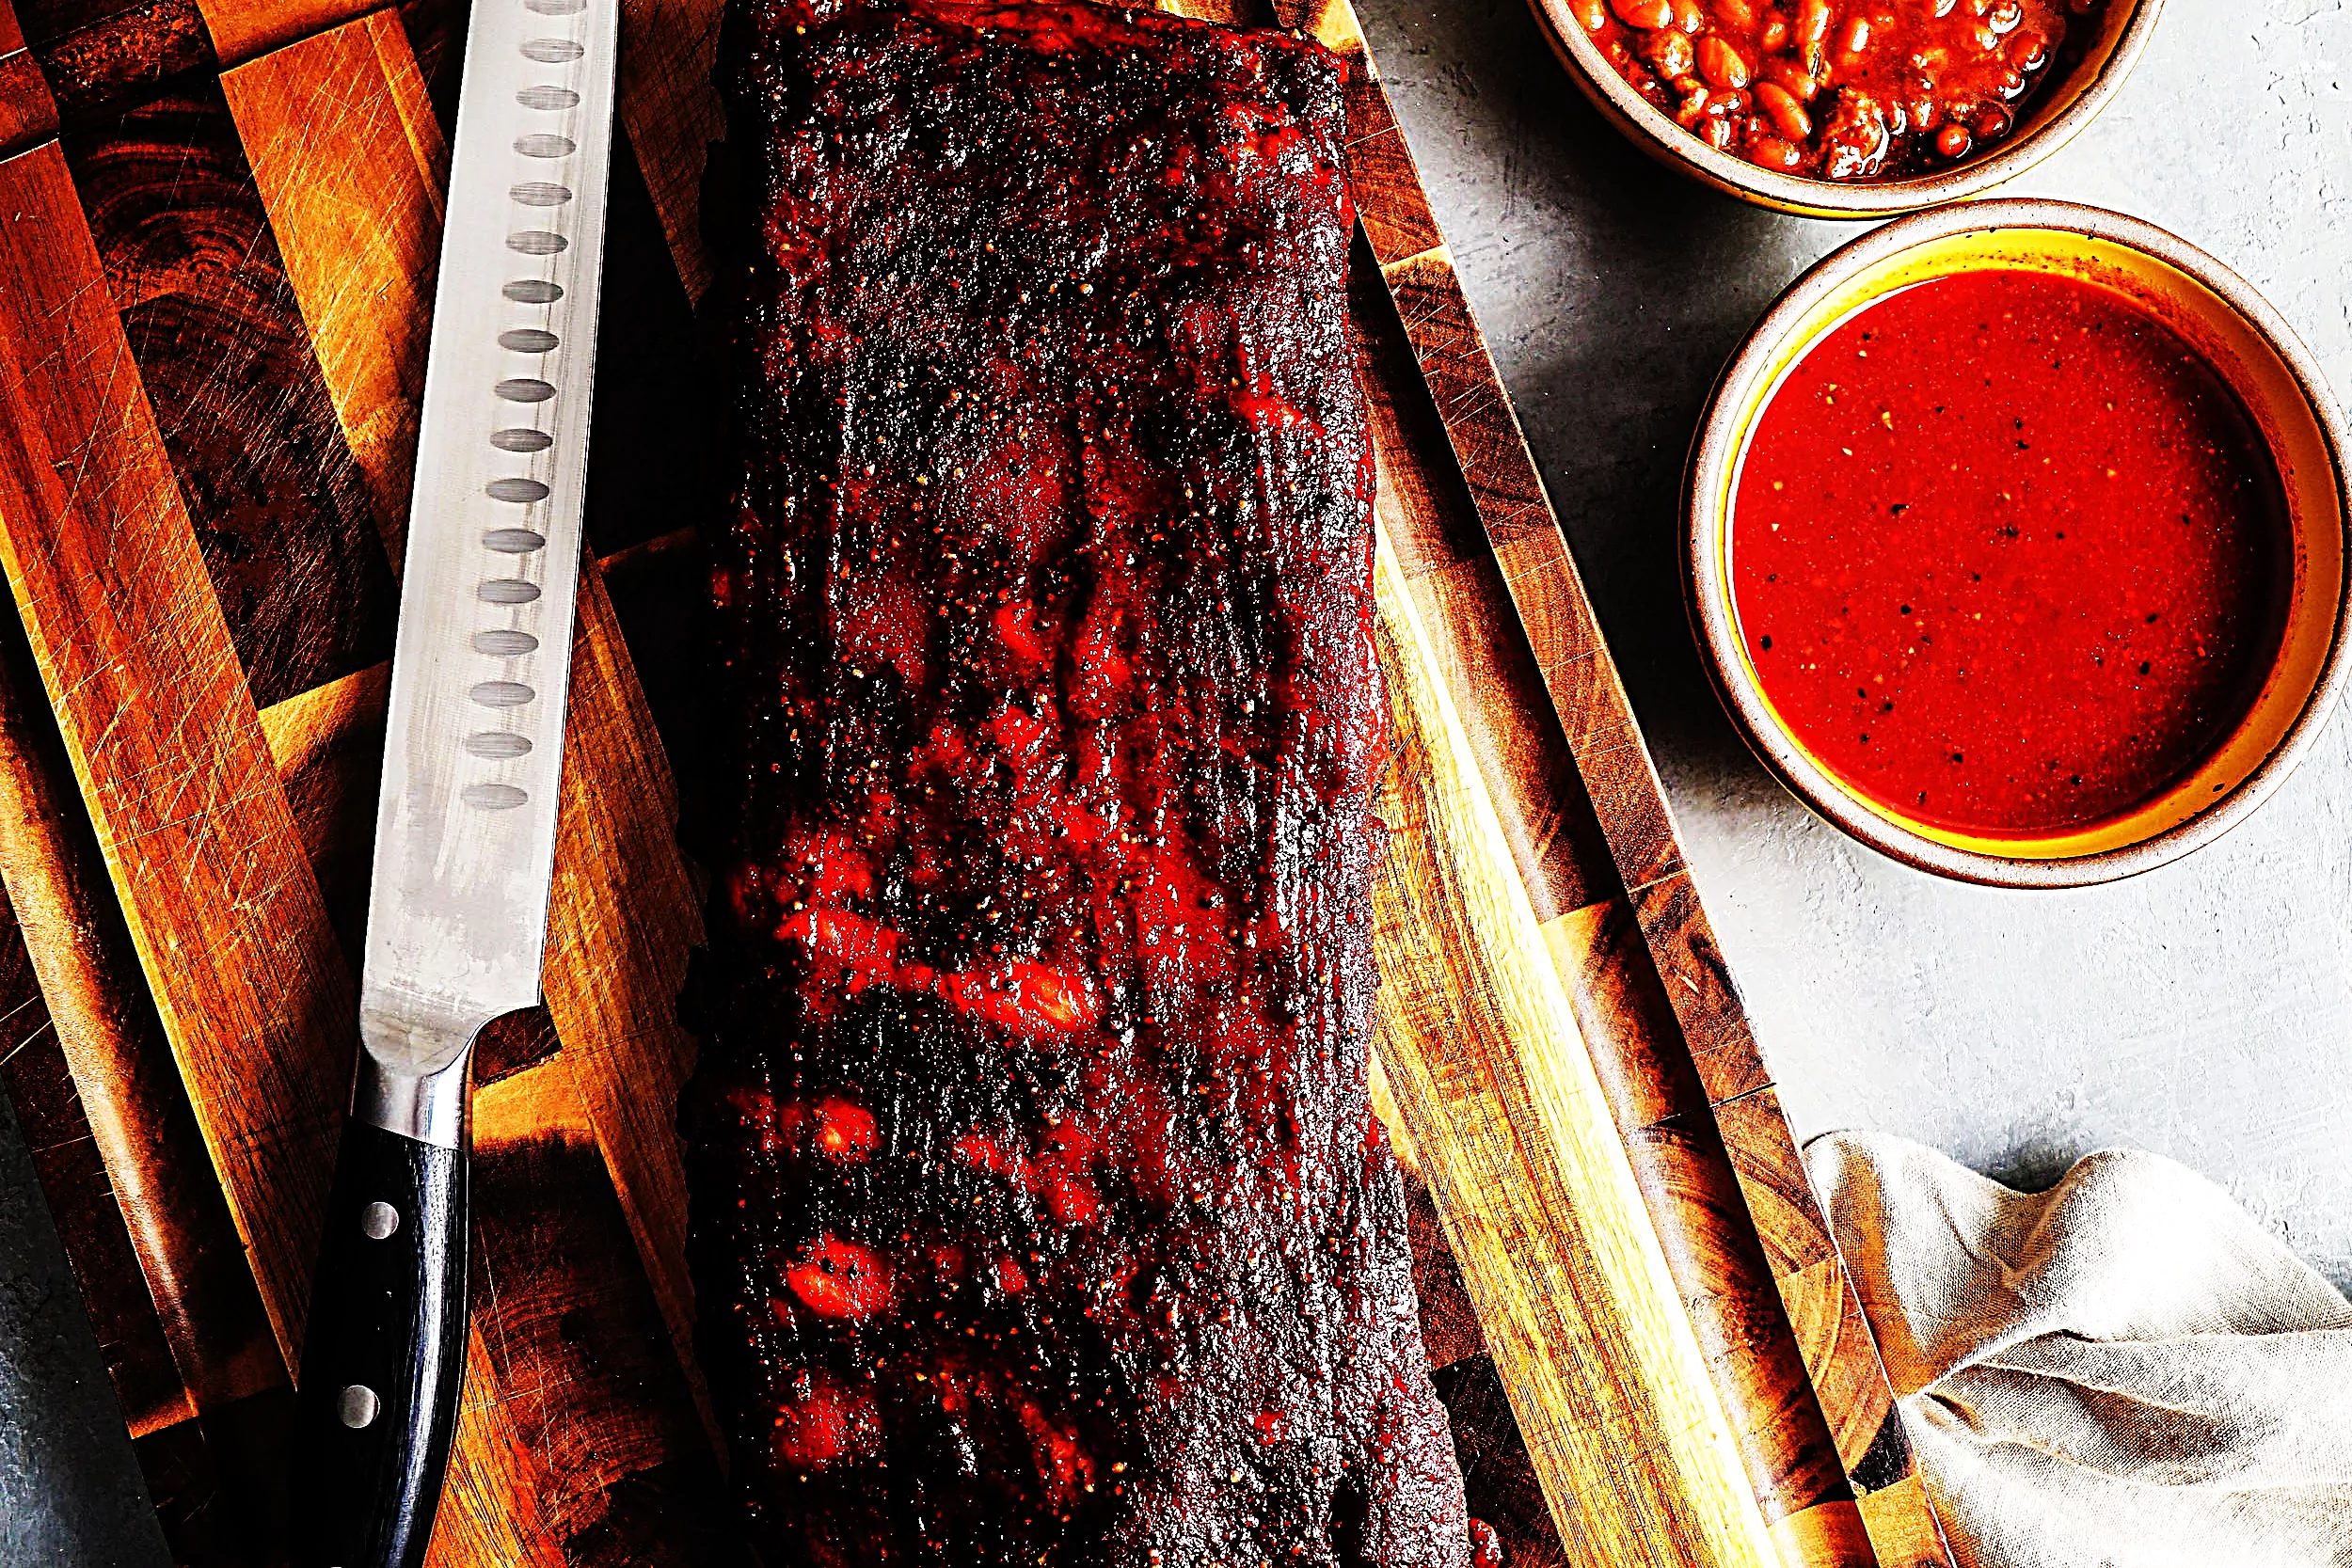 Stupid-Easy Recipe for Classic St. Louis-Style Backyard Ribs (#1 Top-Rated)